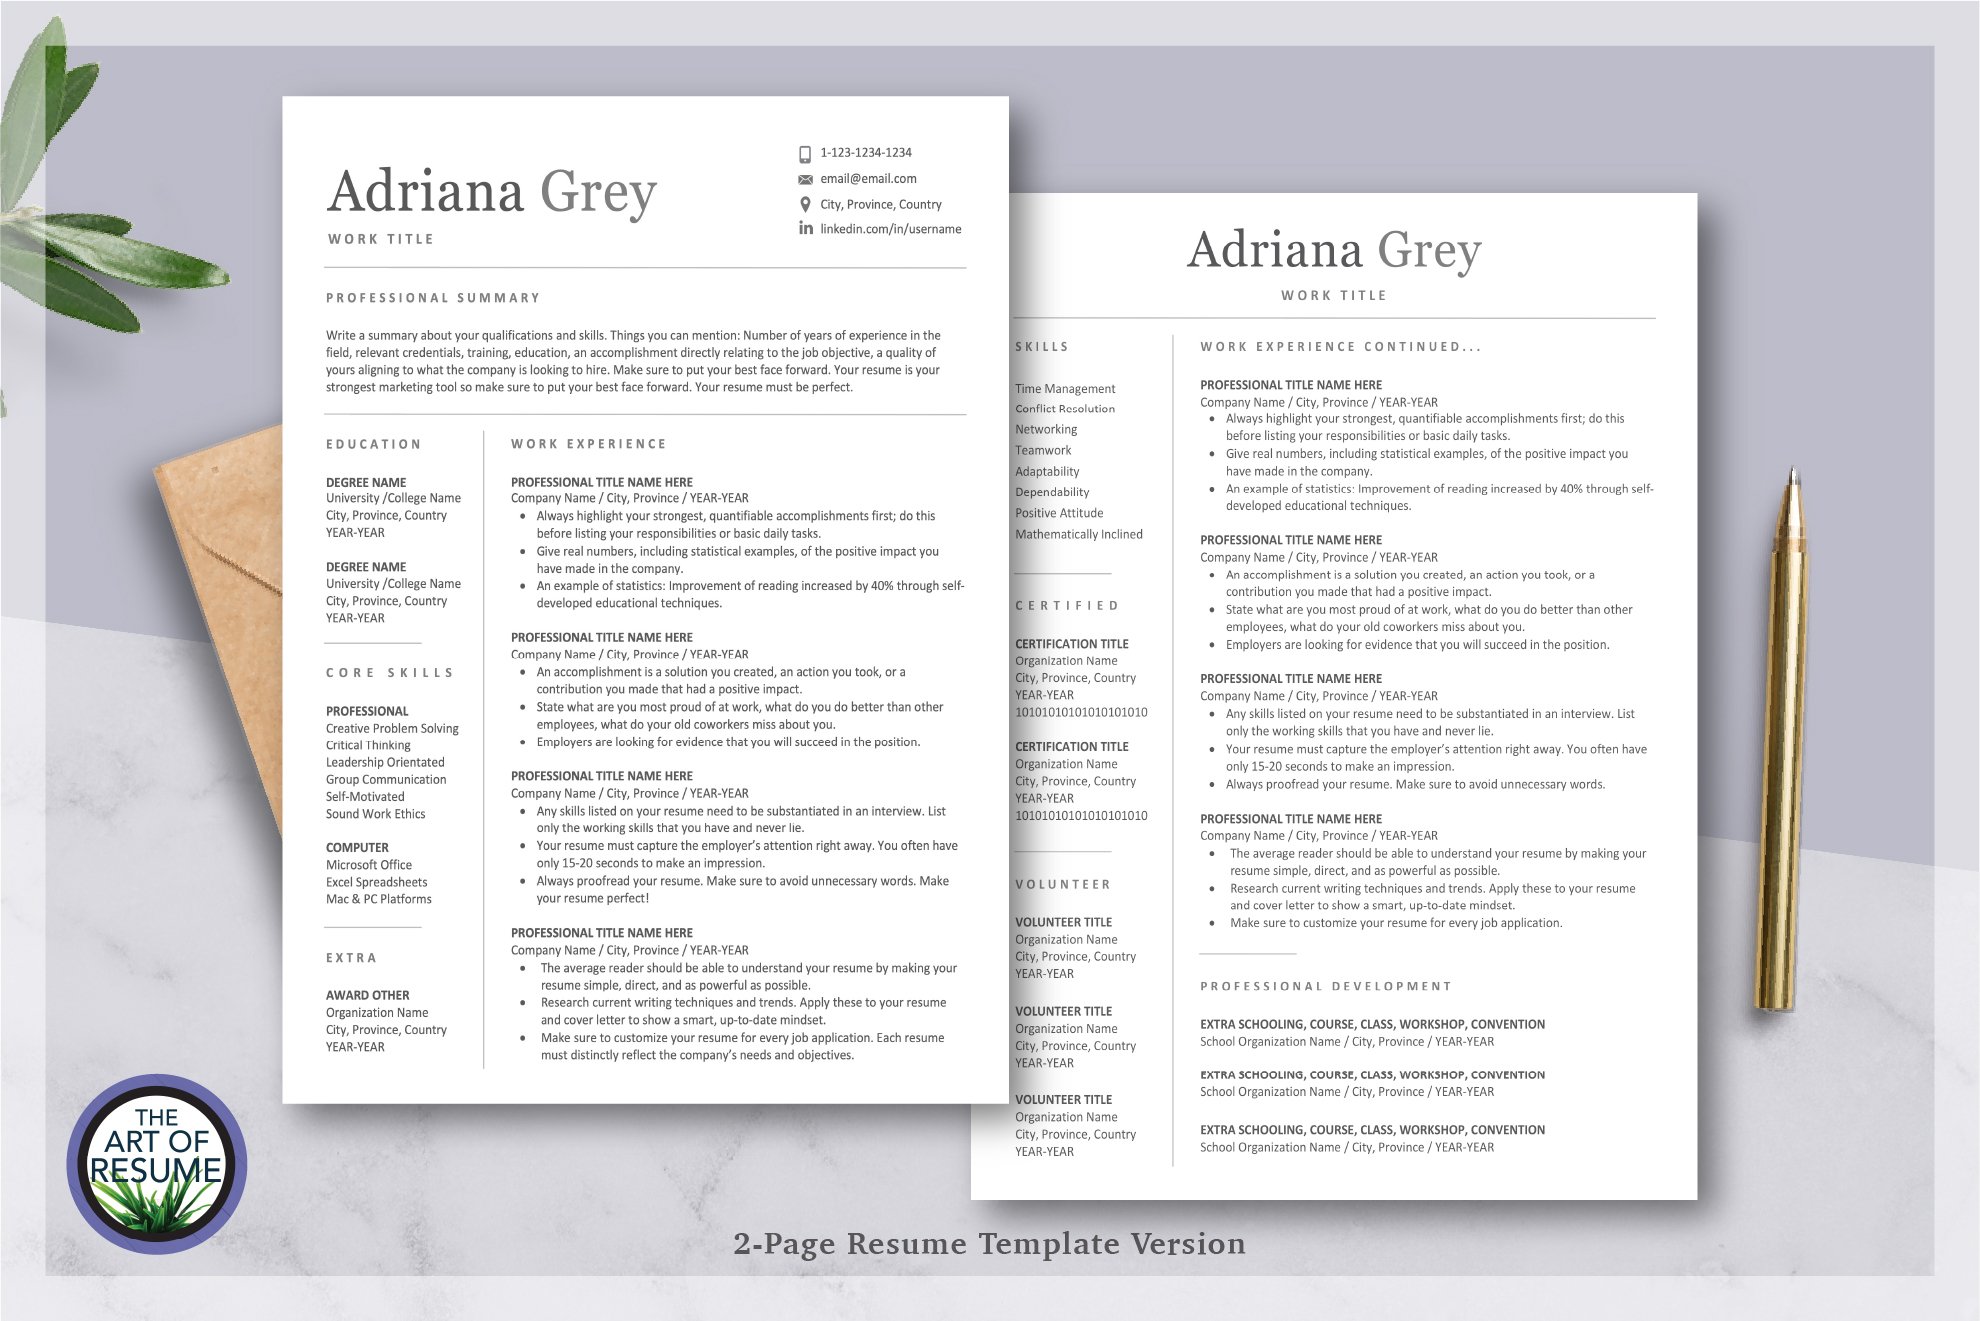 Clean Resume CV Template, Mac & PC preview image.